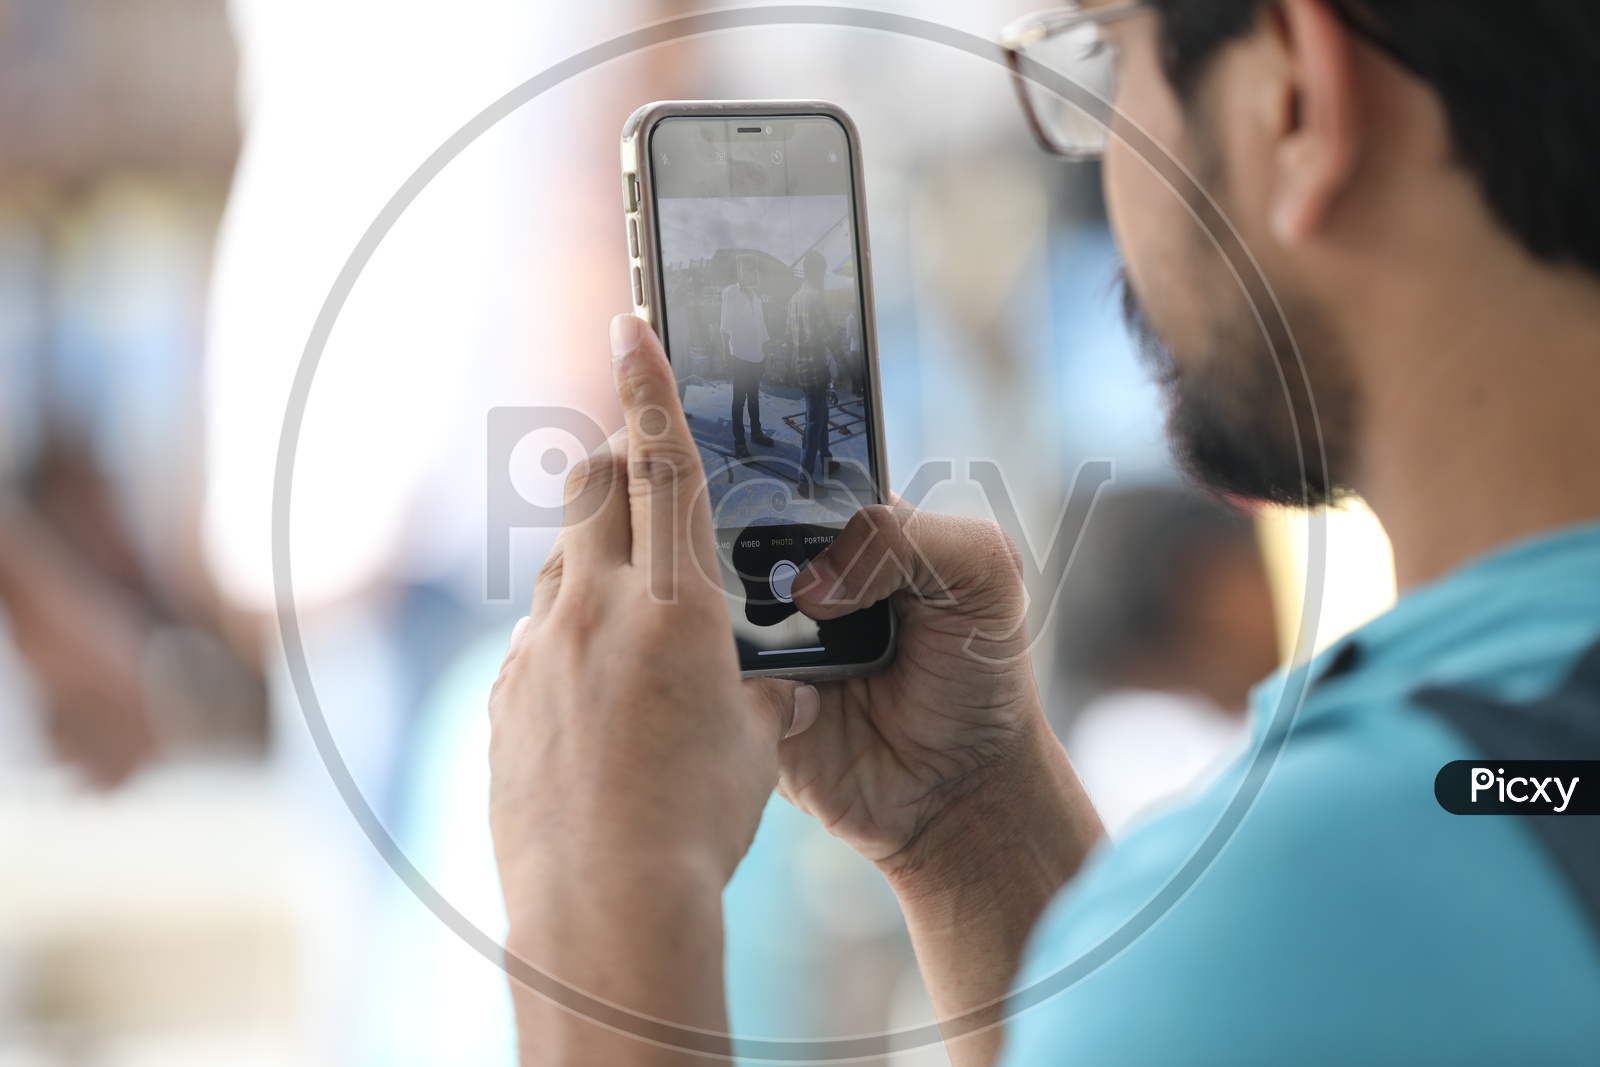 A Man taking a picture with an iPhone